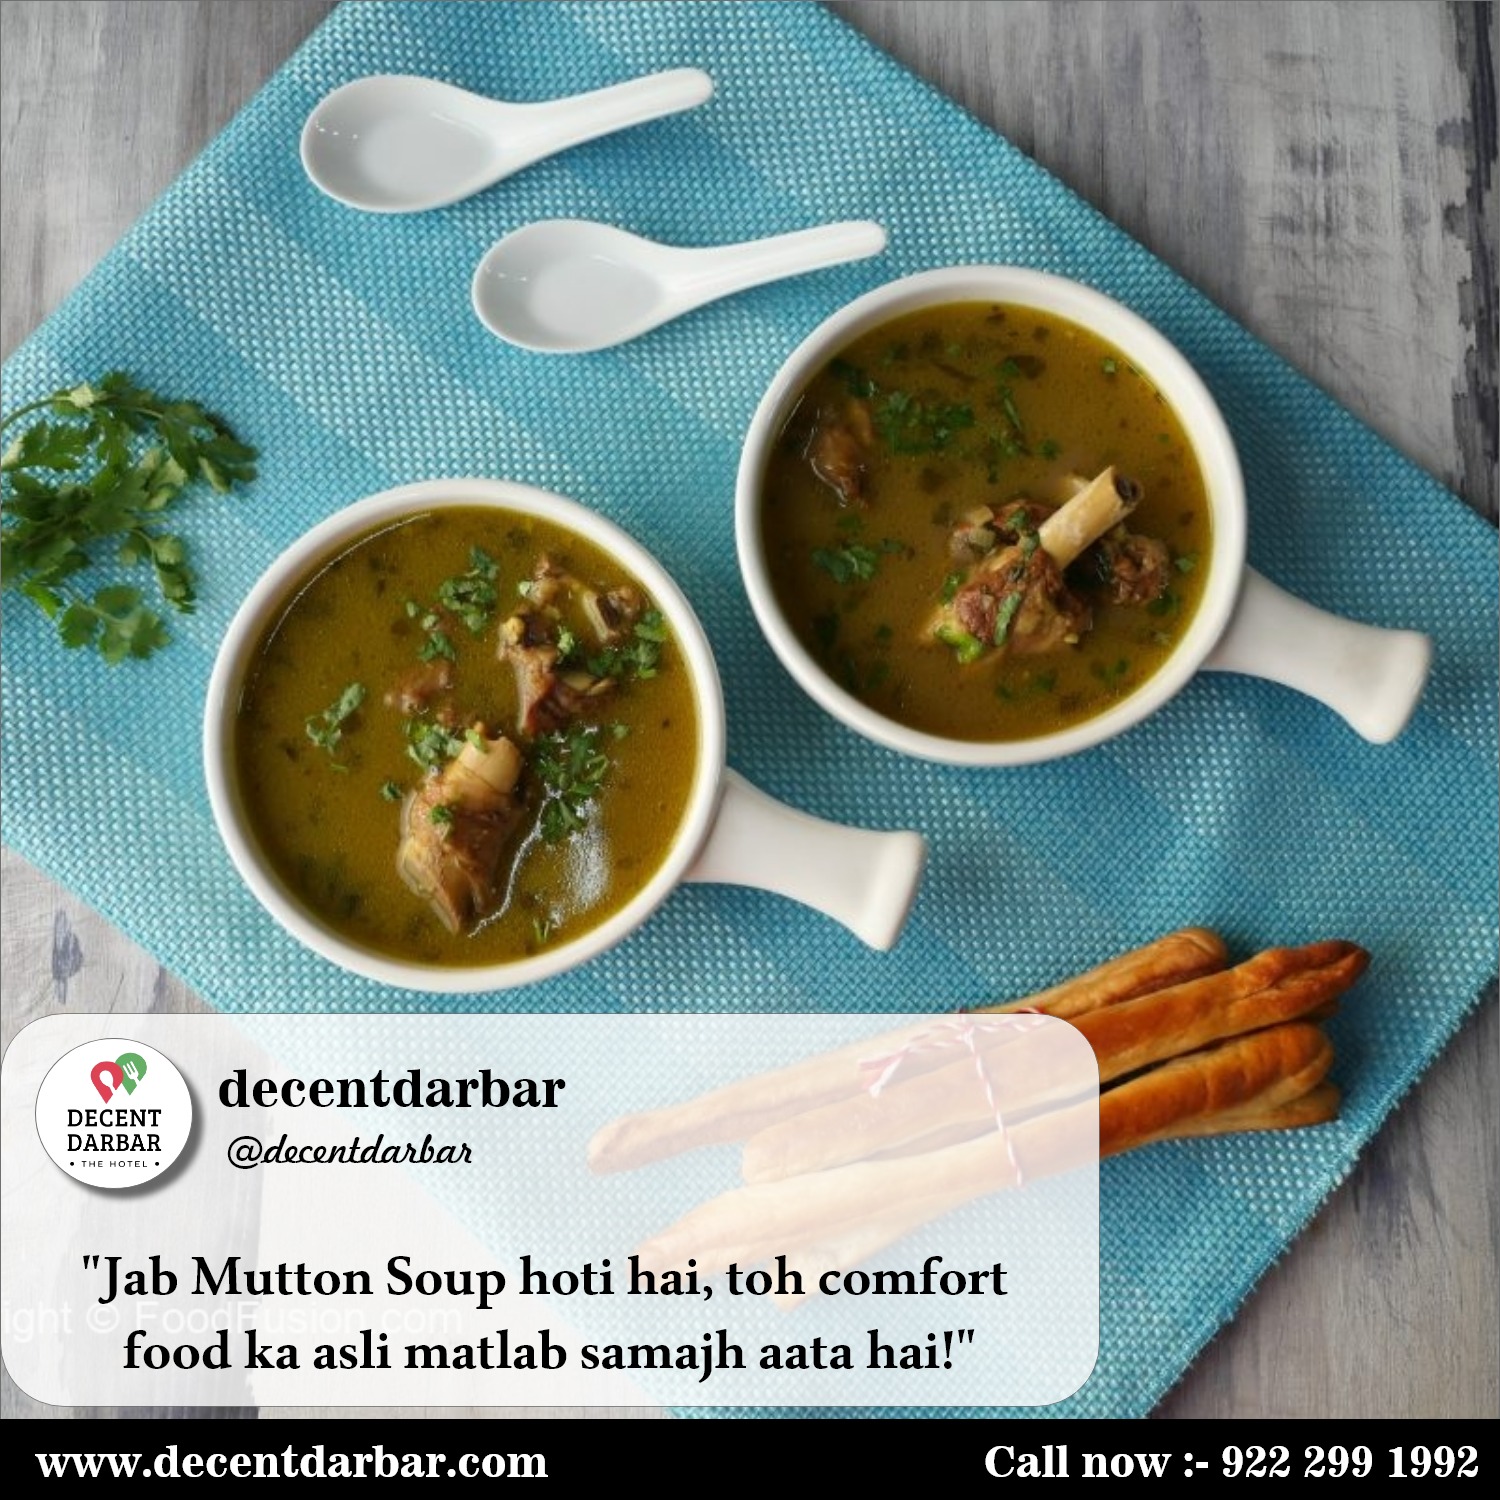 "A bowl of warmth and delight – Mutton Soup from 